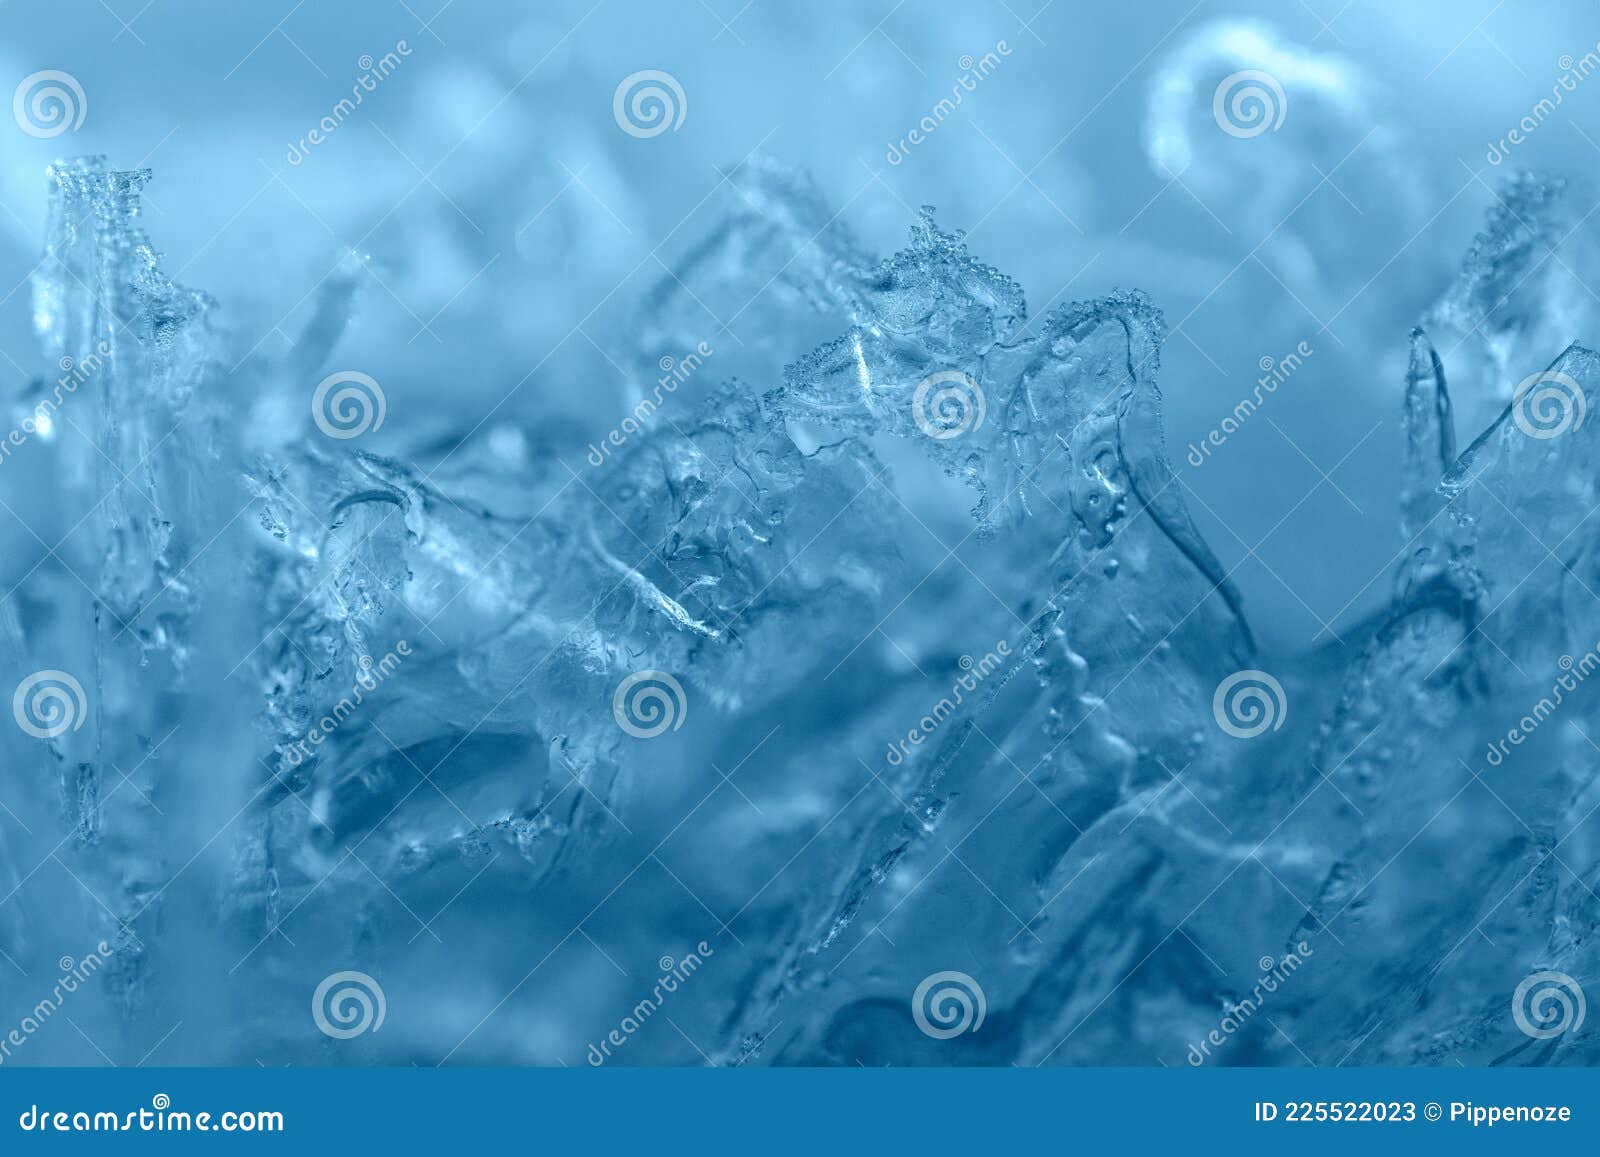 Winter Theme Background with Frozen Blue Ice Splashes in it Stock Image -  Image of frost, crystal: 225522023